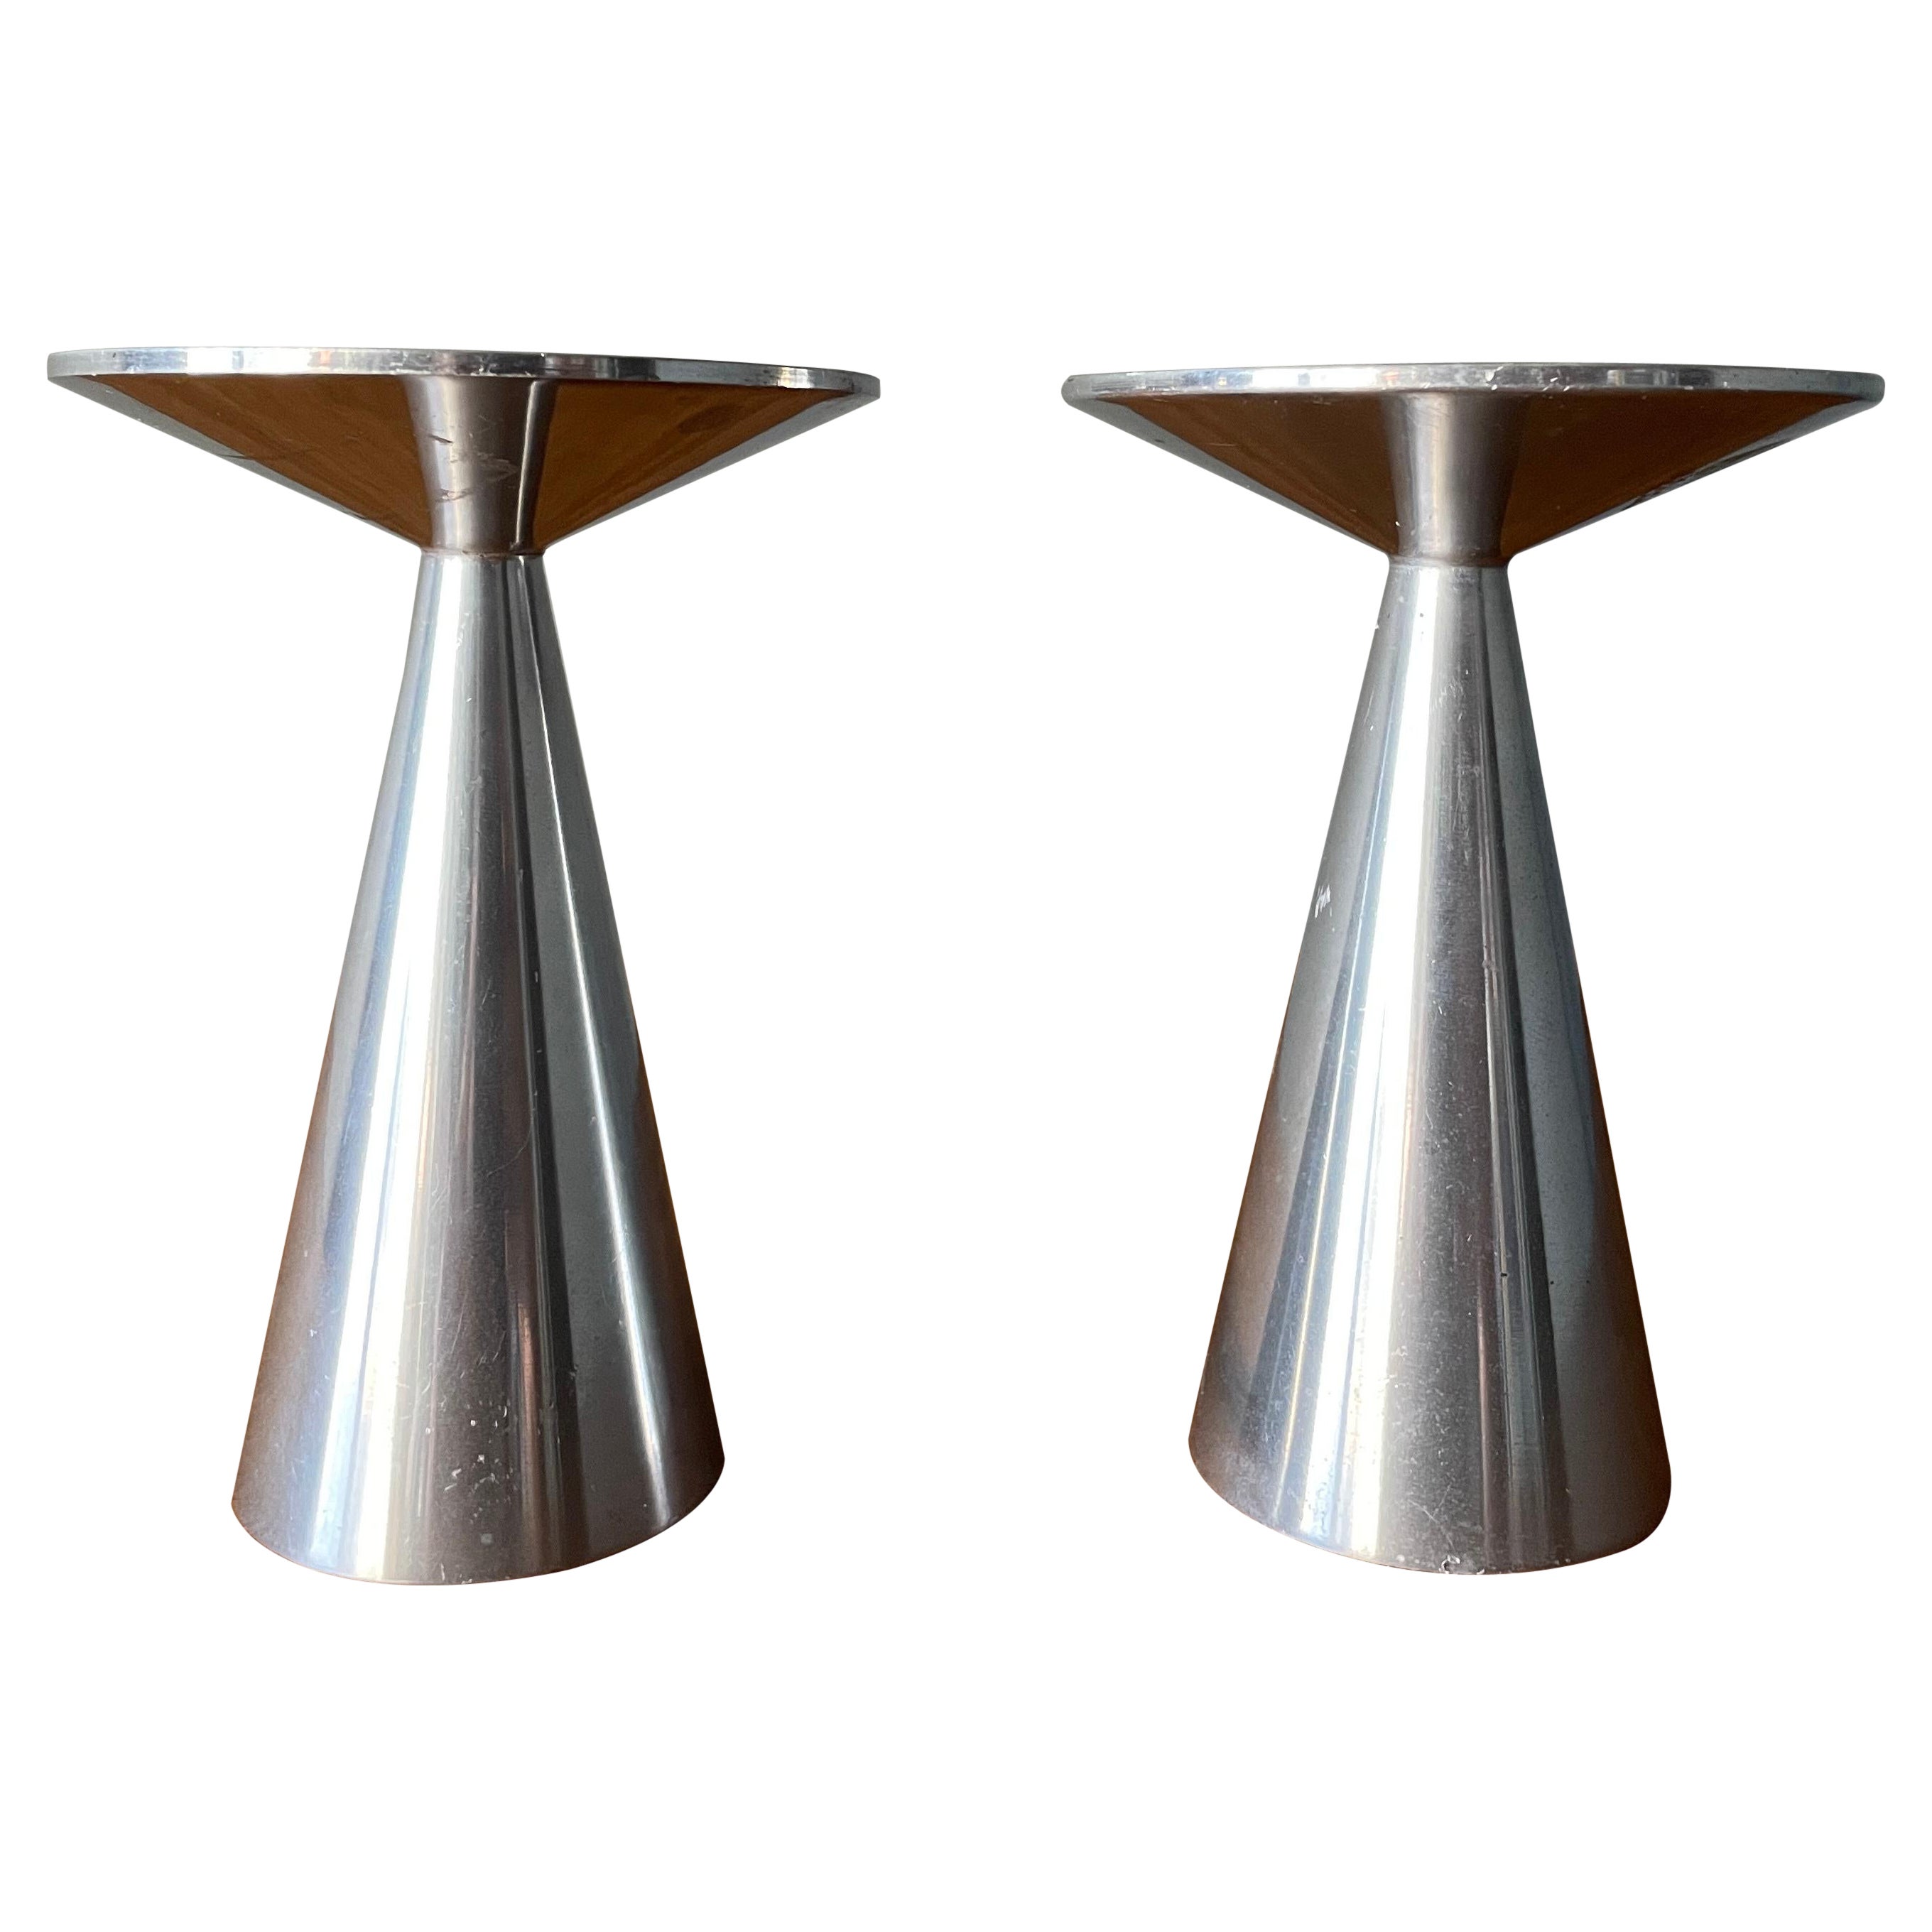 Pair of Vintage Spun Aluminum Candle Holders